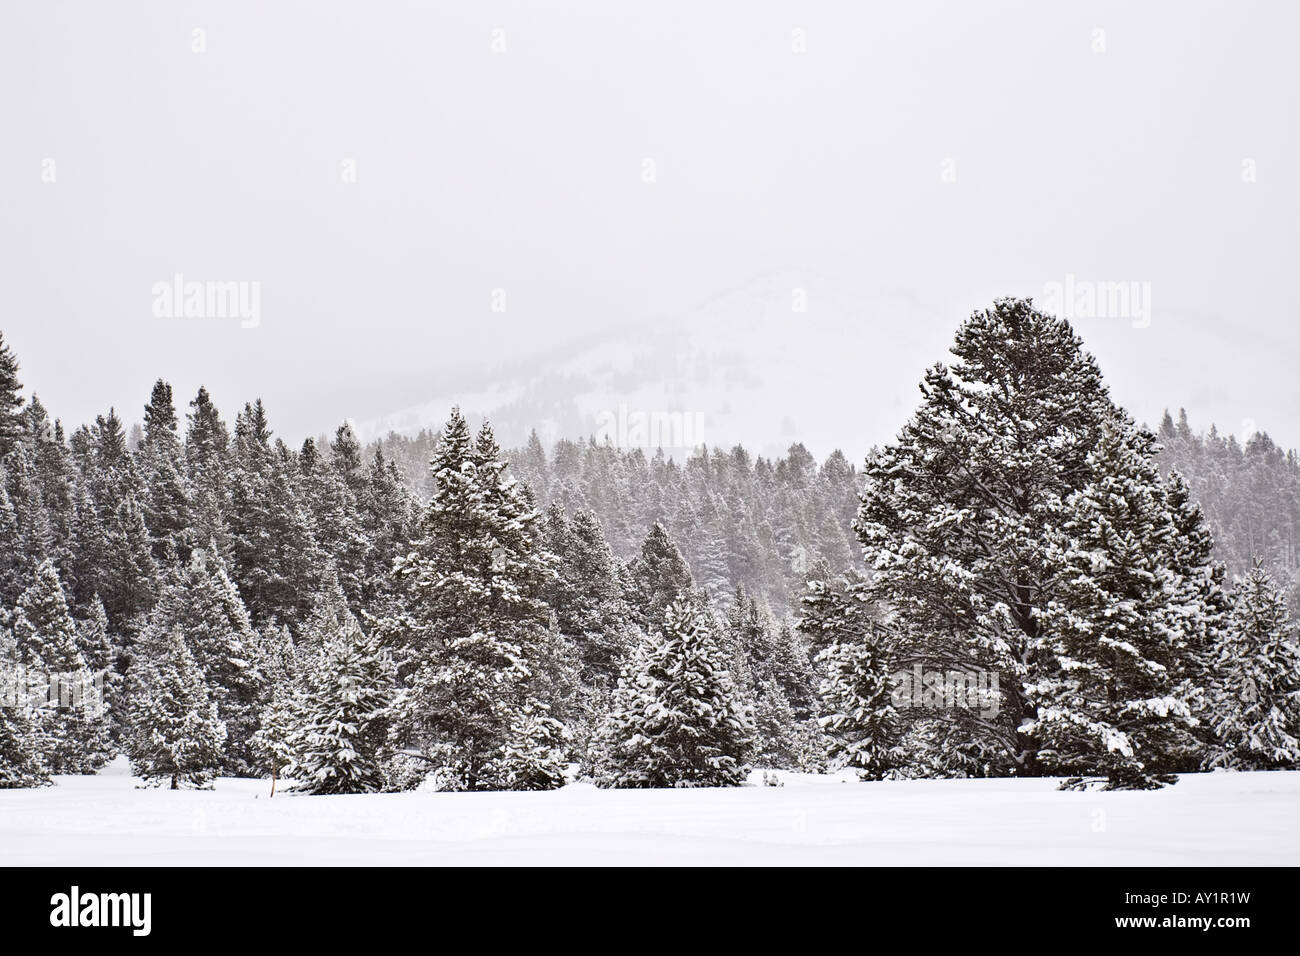 Lodgepole pine (Pinus contorta) trees covered with snow during a snowstorm in the Big Horn Mountains of Wyoming Stock Photo